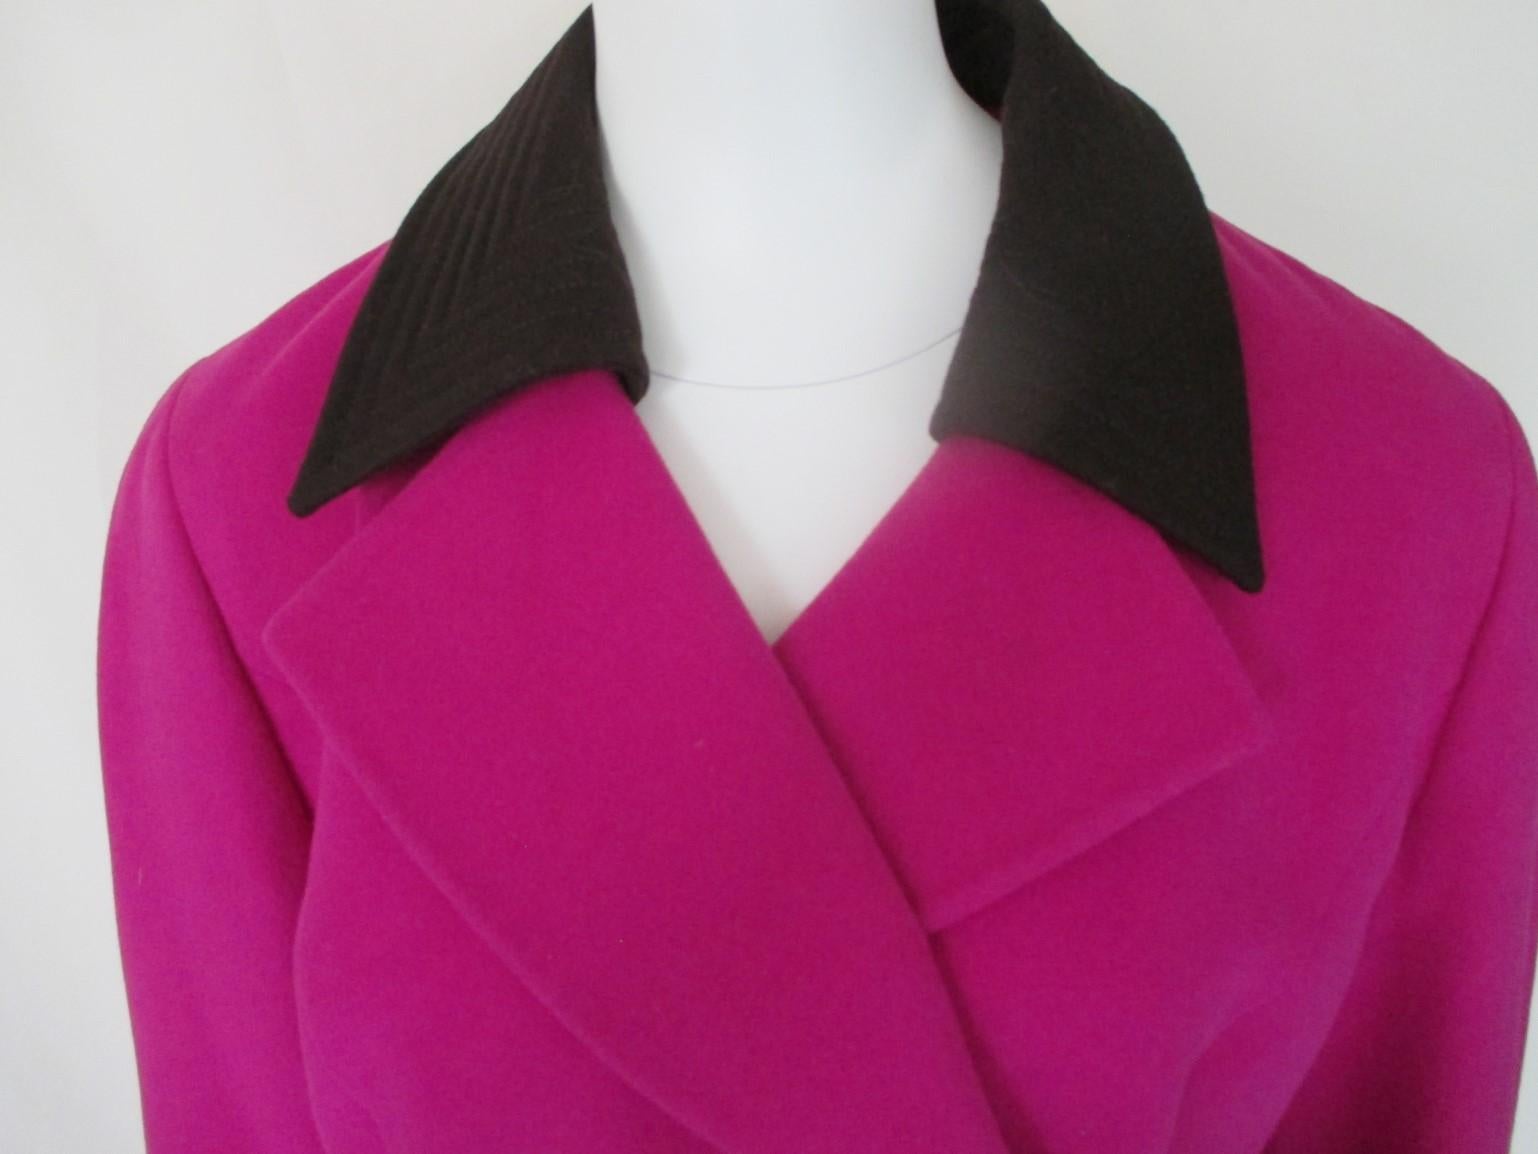 Double brested short jacket with inside button, no pockets
Color: black /magenta pink
periode: 1980's 
Designer: Louis Feraud
Material: wool / cashmere
pre-owned condition
Size: US 12/ EU 42/UK 16,  M/L, see section measurements.

Please note that